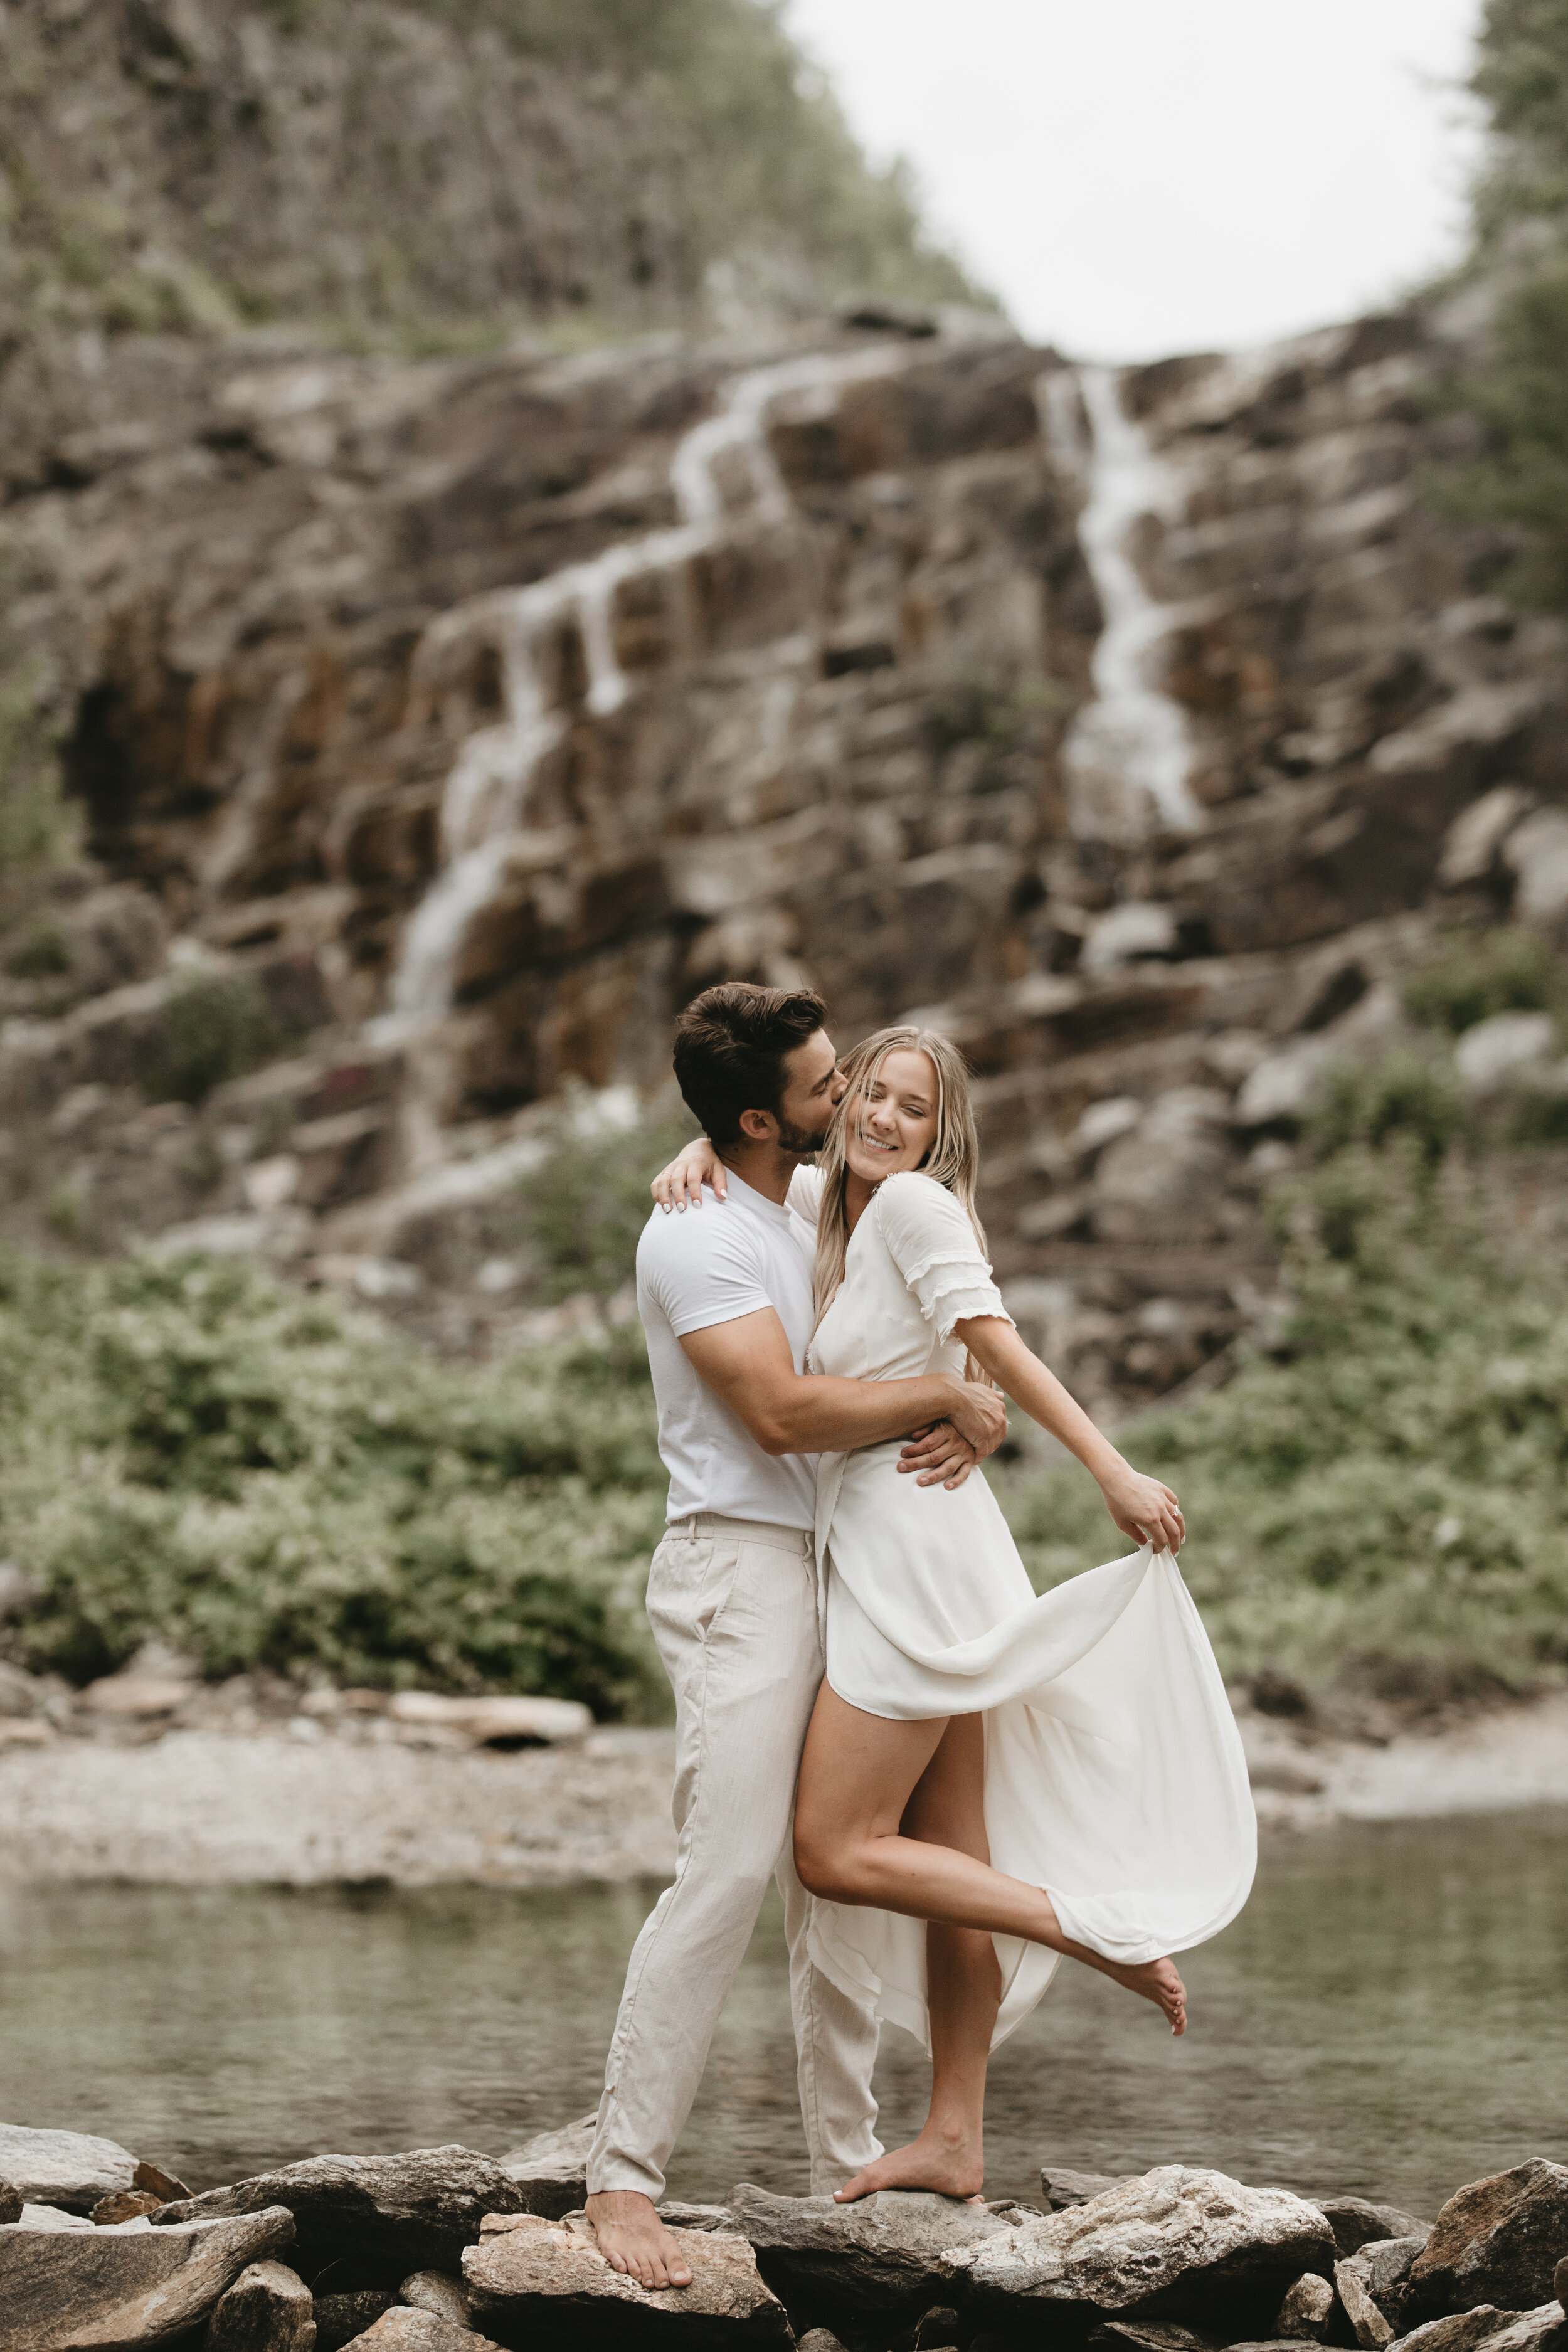 Nicole-Daacke-Photography-michaux-state-forest-elopement-adventure-engagement-session-pennsylvania-elopement-pa-elopement-photographer-gettysburg-photographer-state-park-elopement-engagement-session-pennsylvania-waterfall-162.jpg